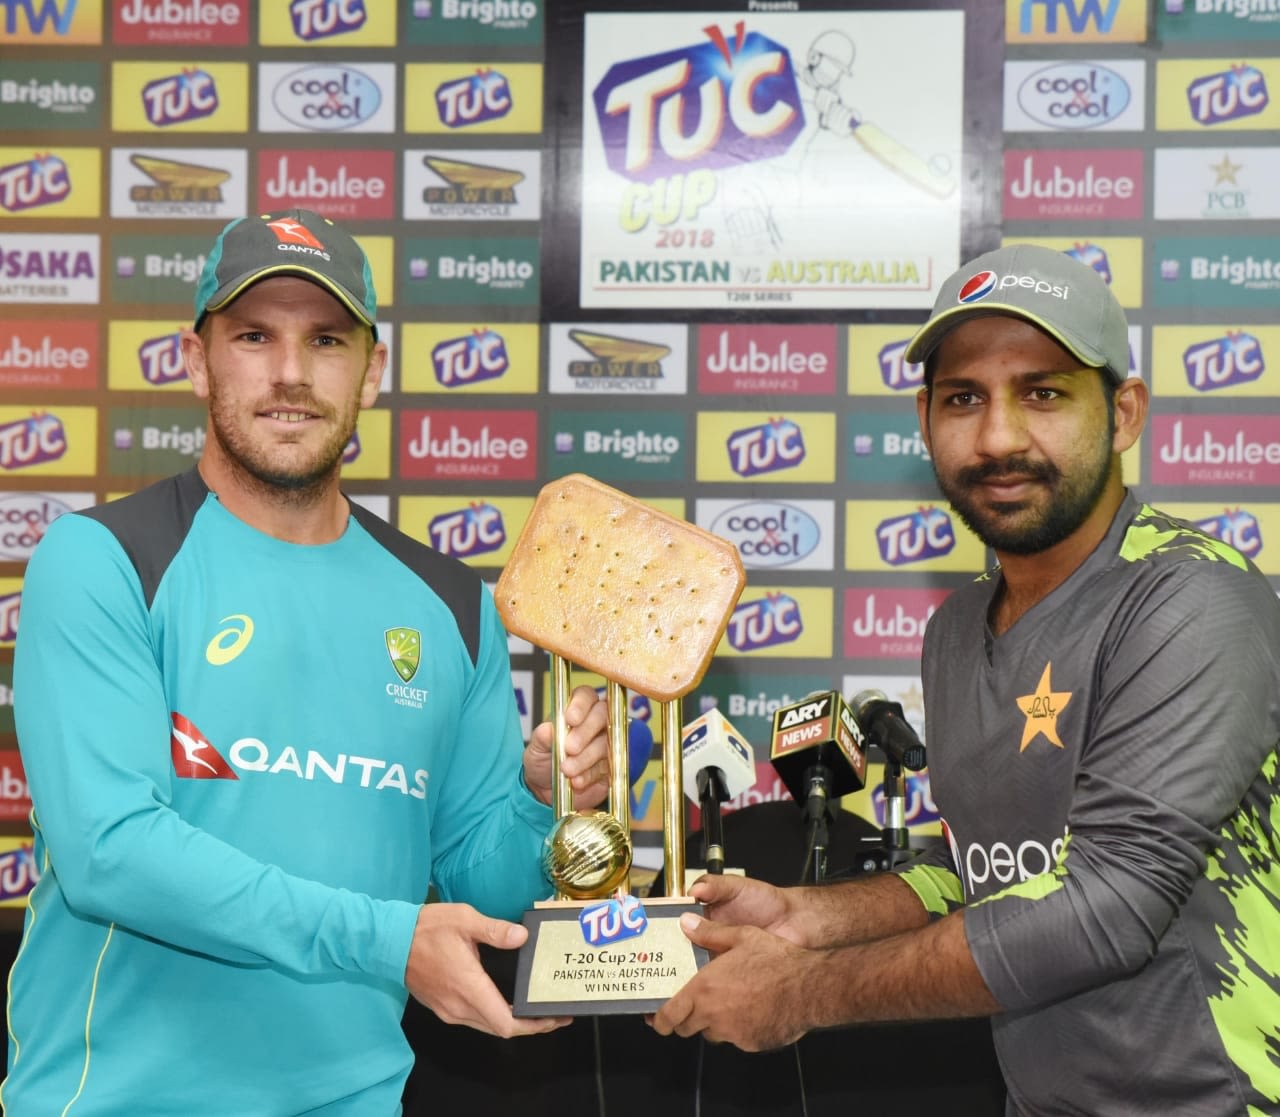 Taking the biscuit: Aaron Finch and Sarfraz Ahmed pose with the T20I series trophy, Abu Dhabi, October 23, 2018